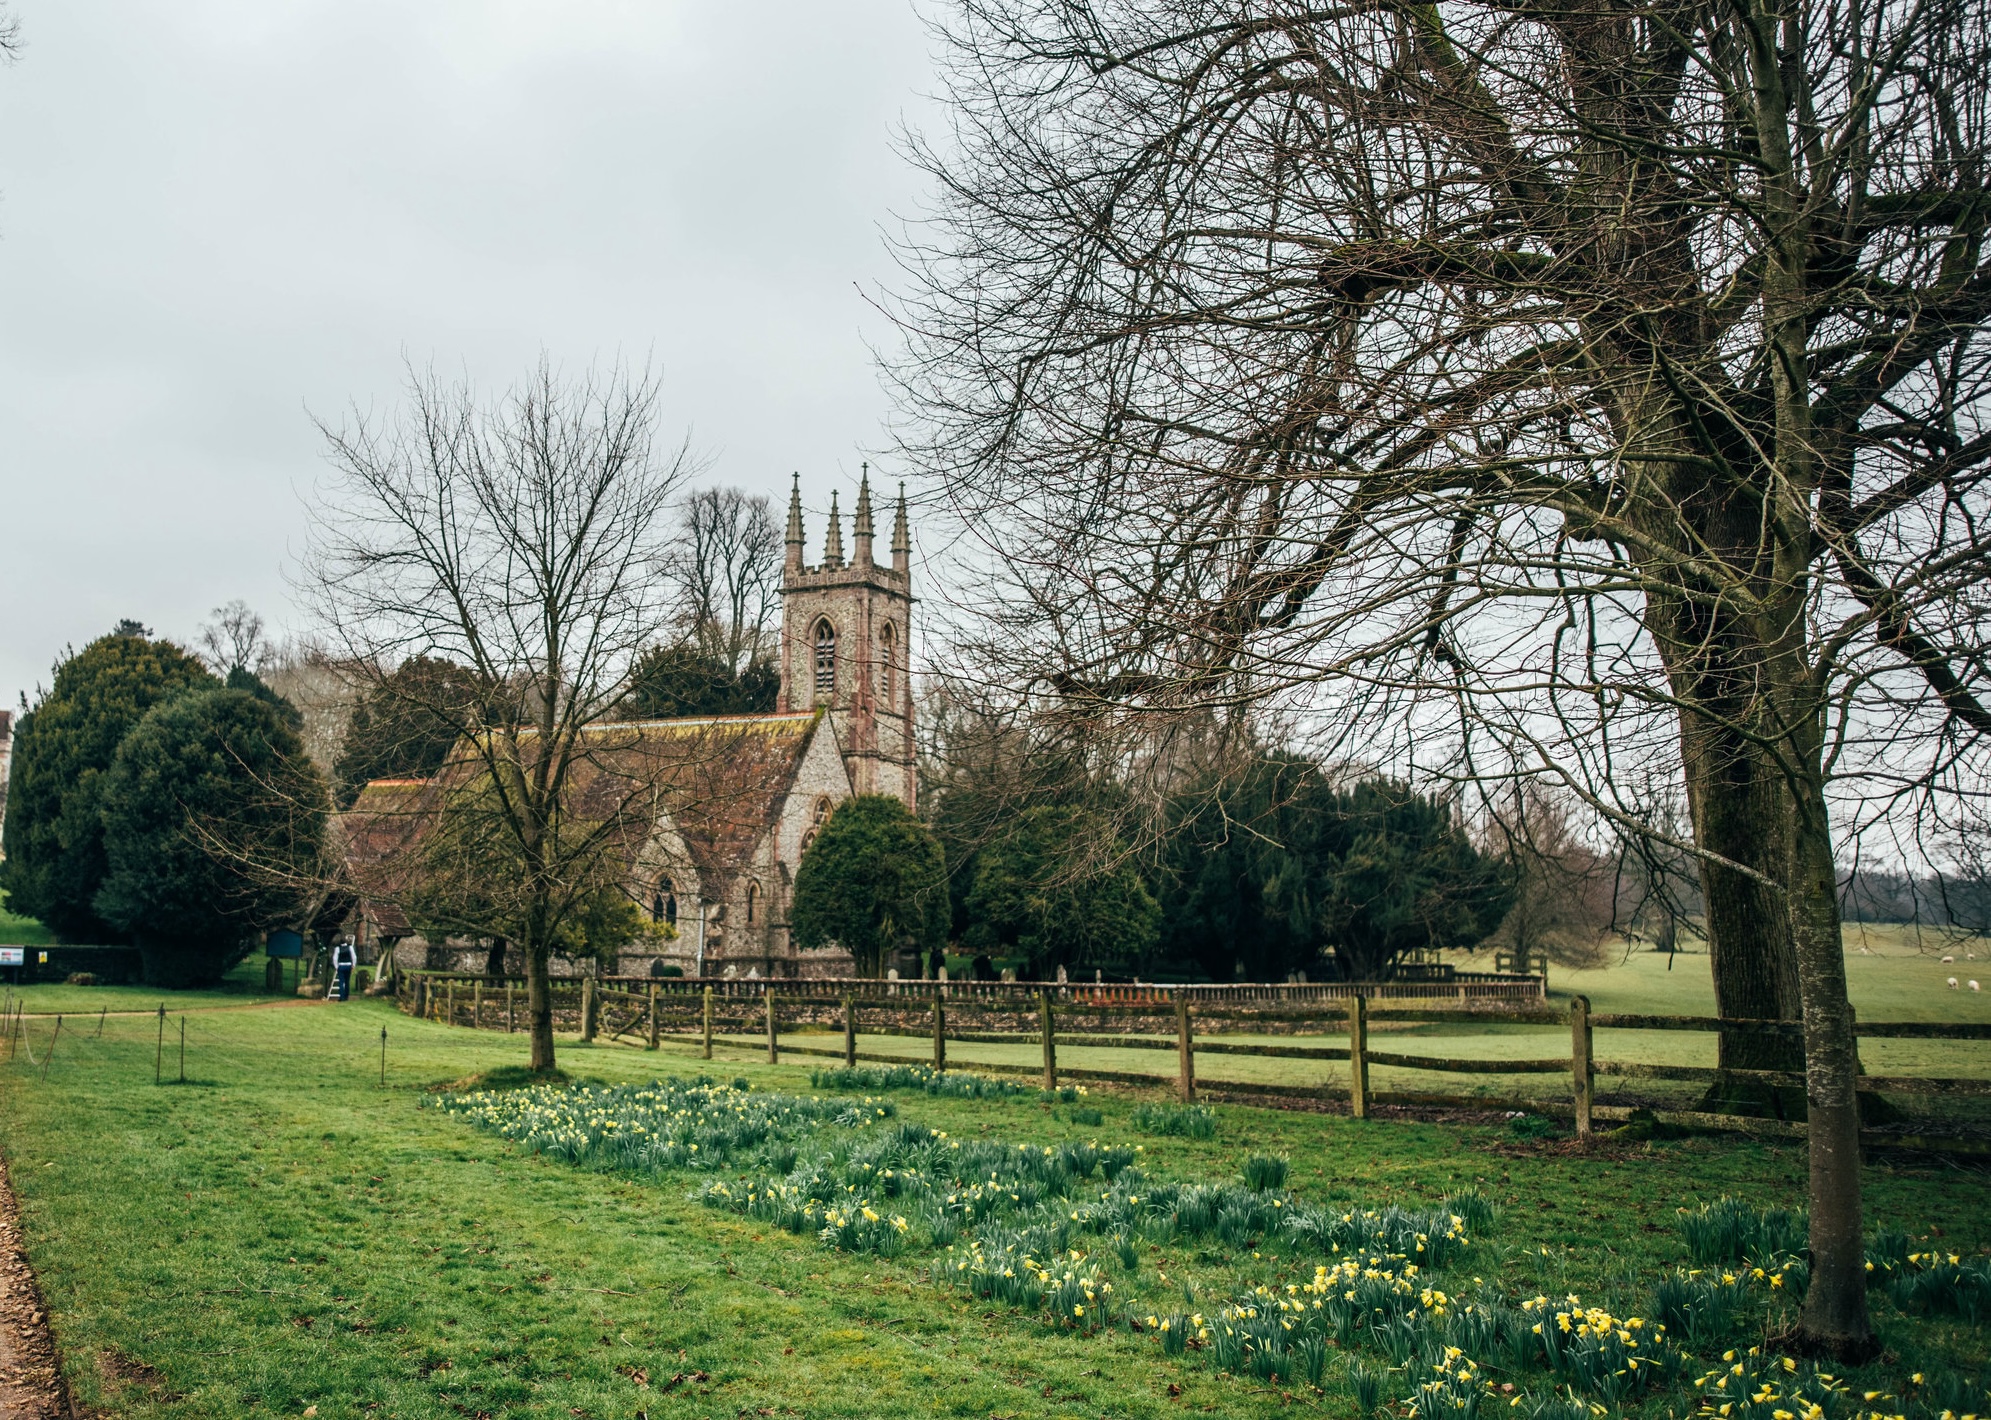 Church set in a field surrounded by daffodils. 